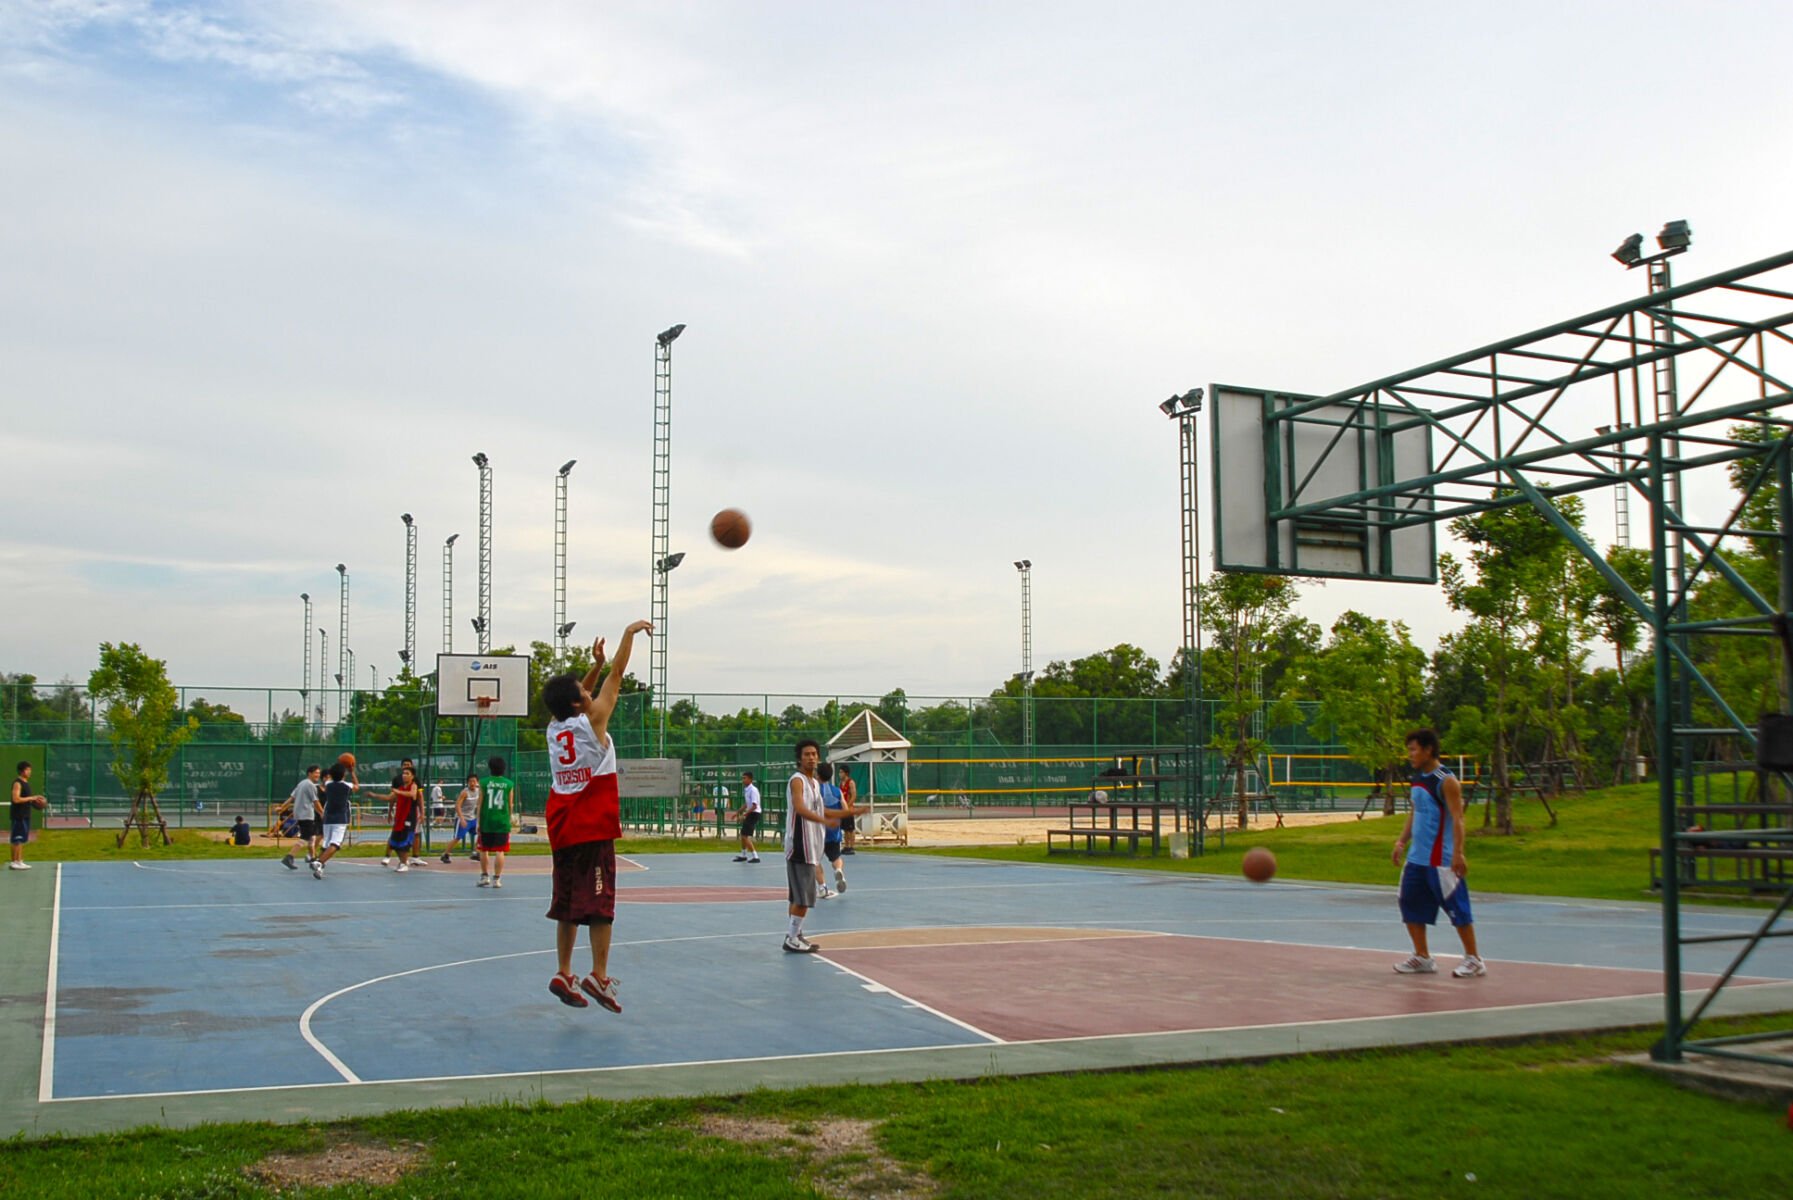 Play basketball for free in Bangkok | News by Thaiger